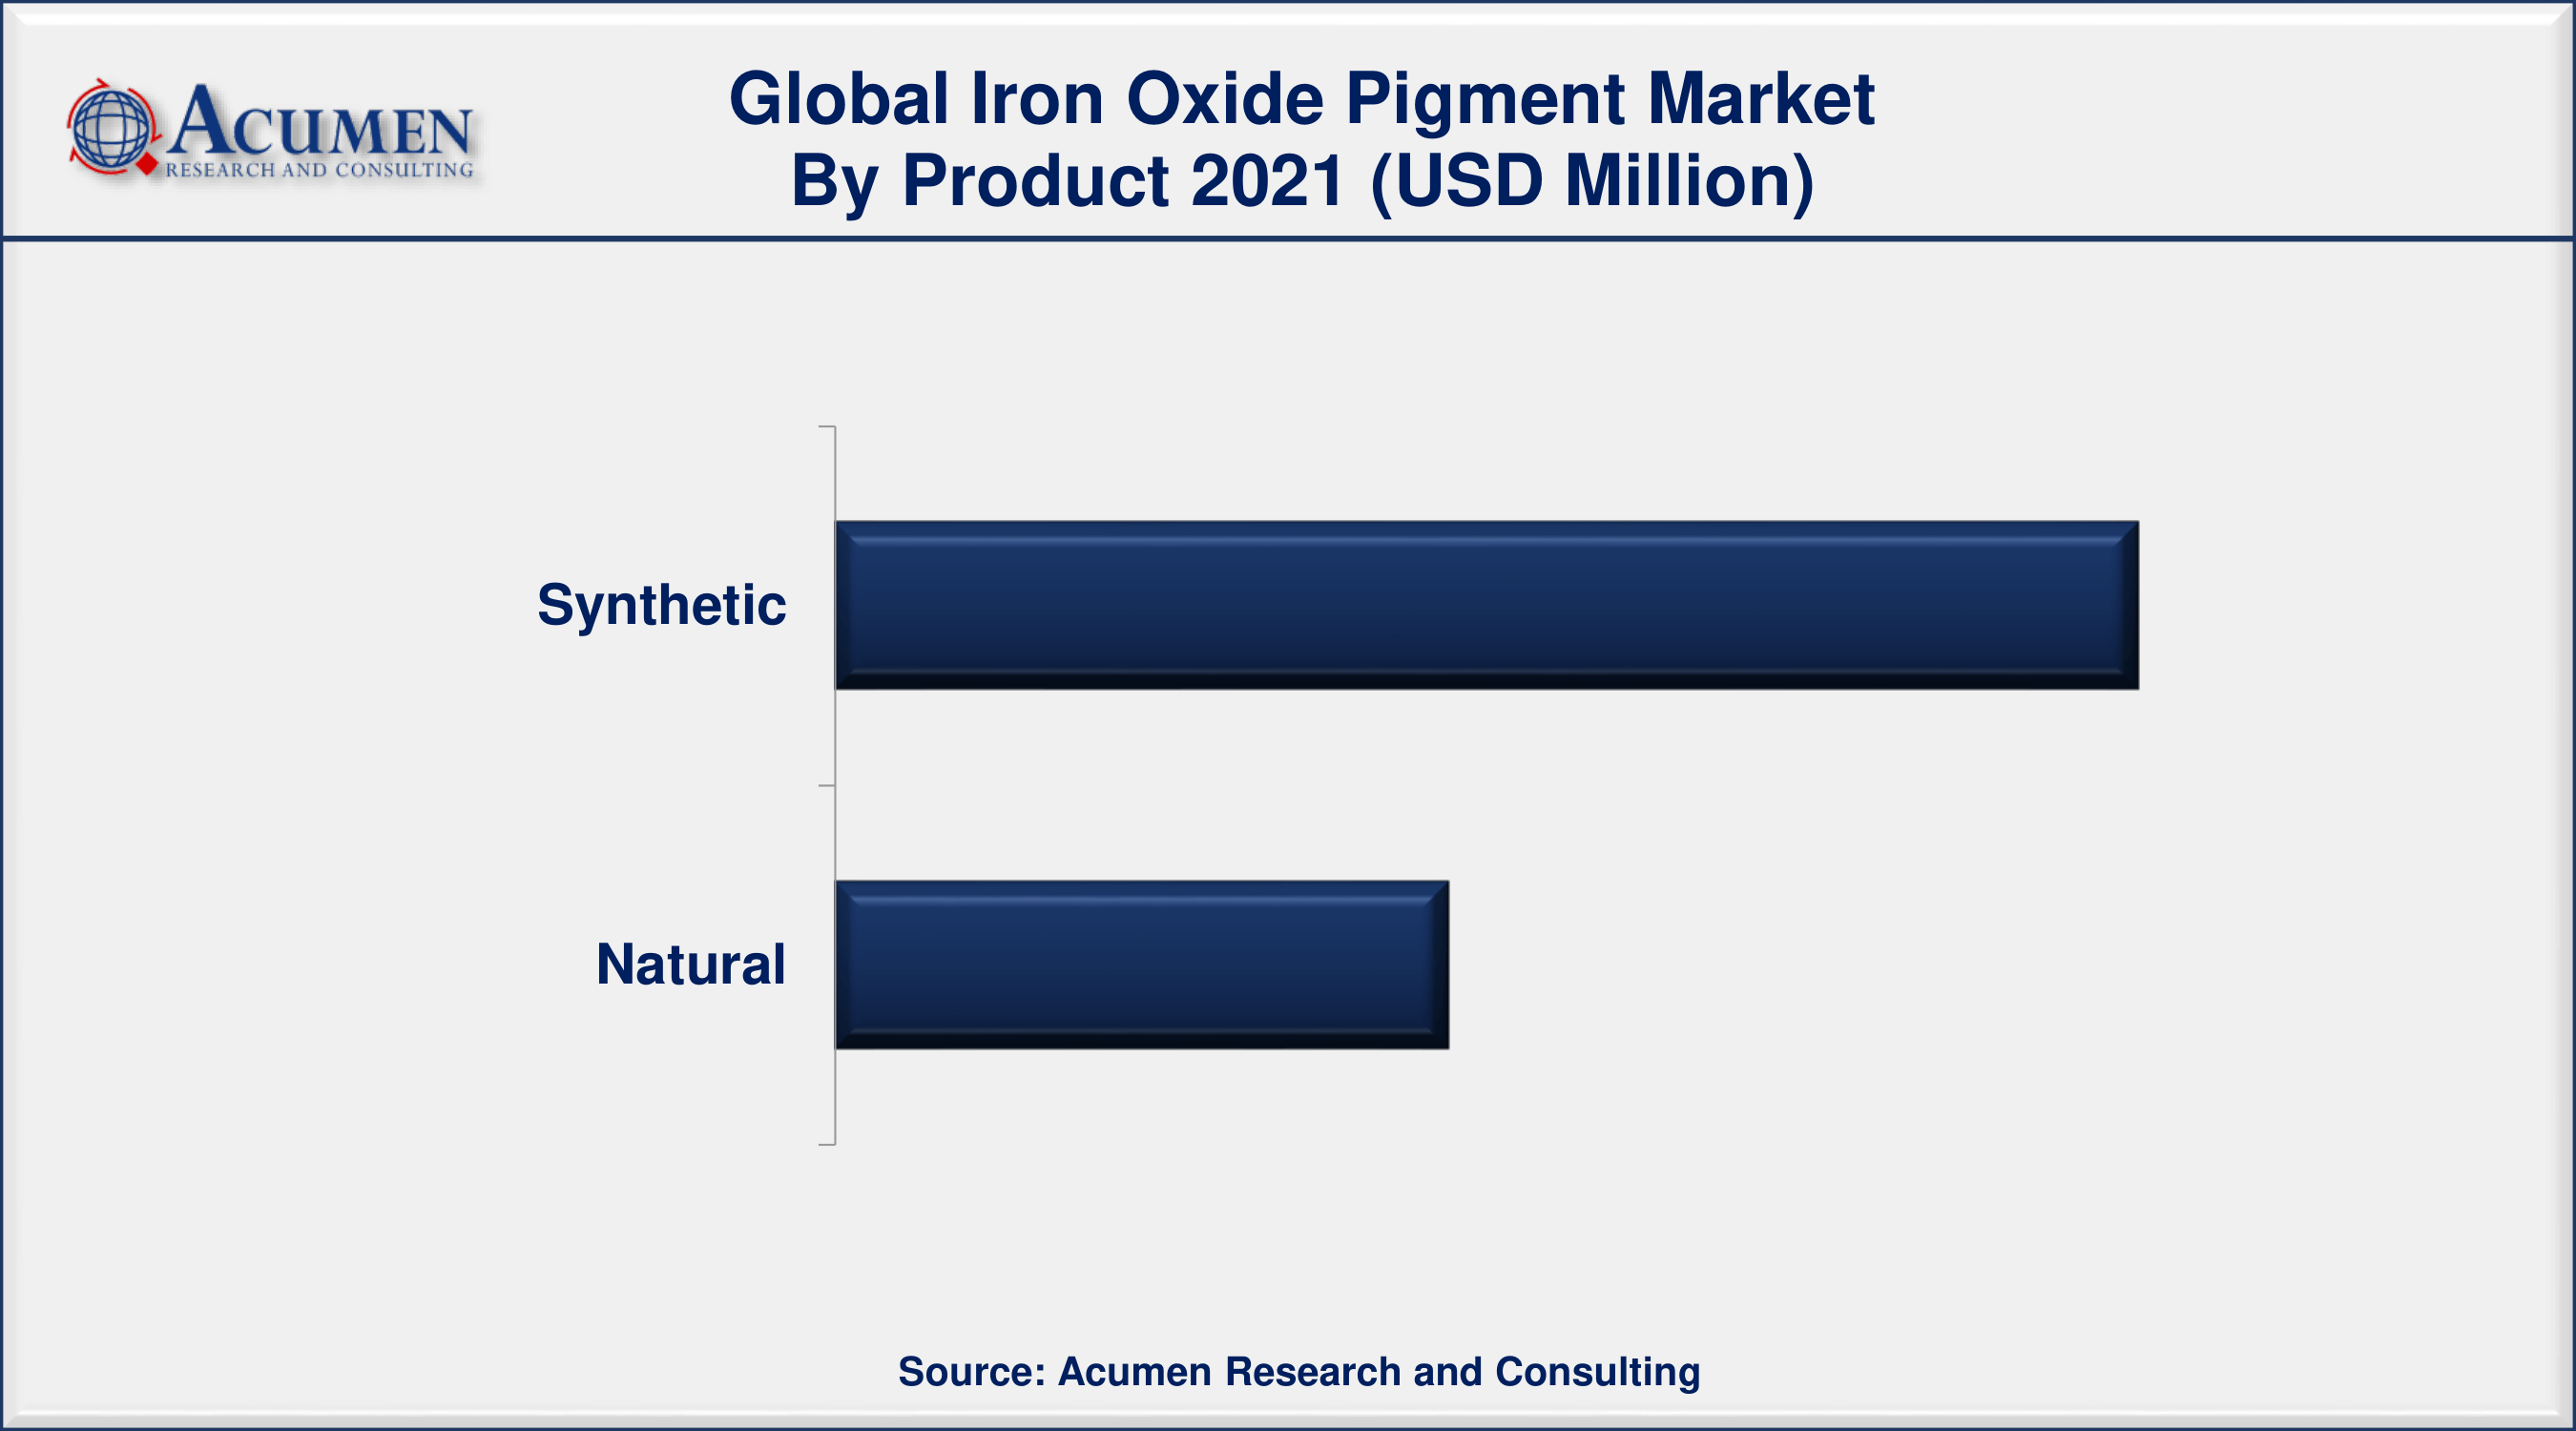 By product, the synthetic segment has accounted market share of over 68% in 2021